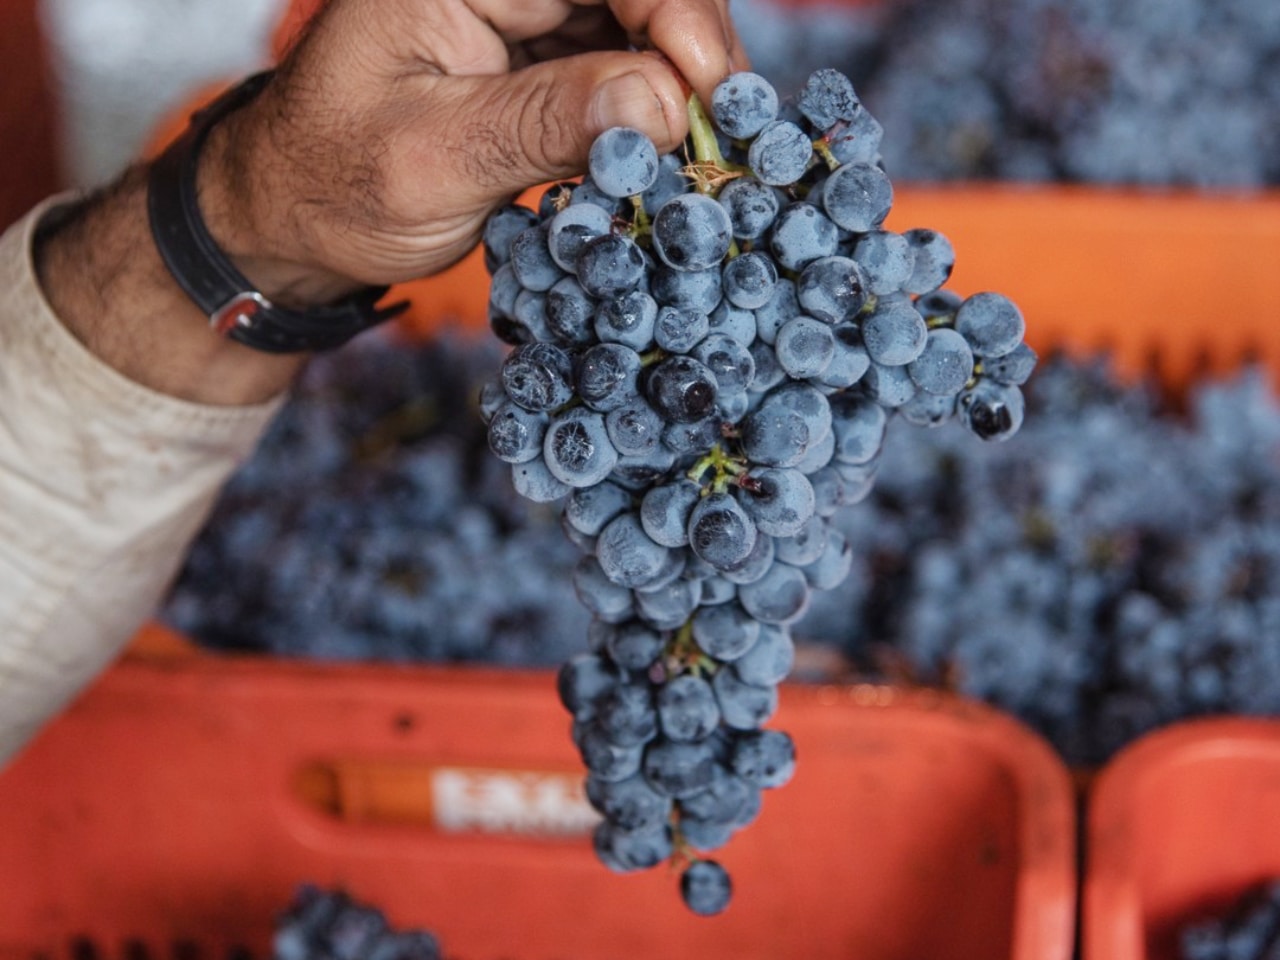  The 2022 harvest at Manousakis Winery was one of the best harvests in recent years